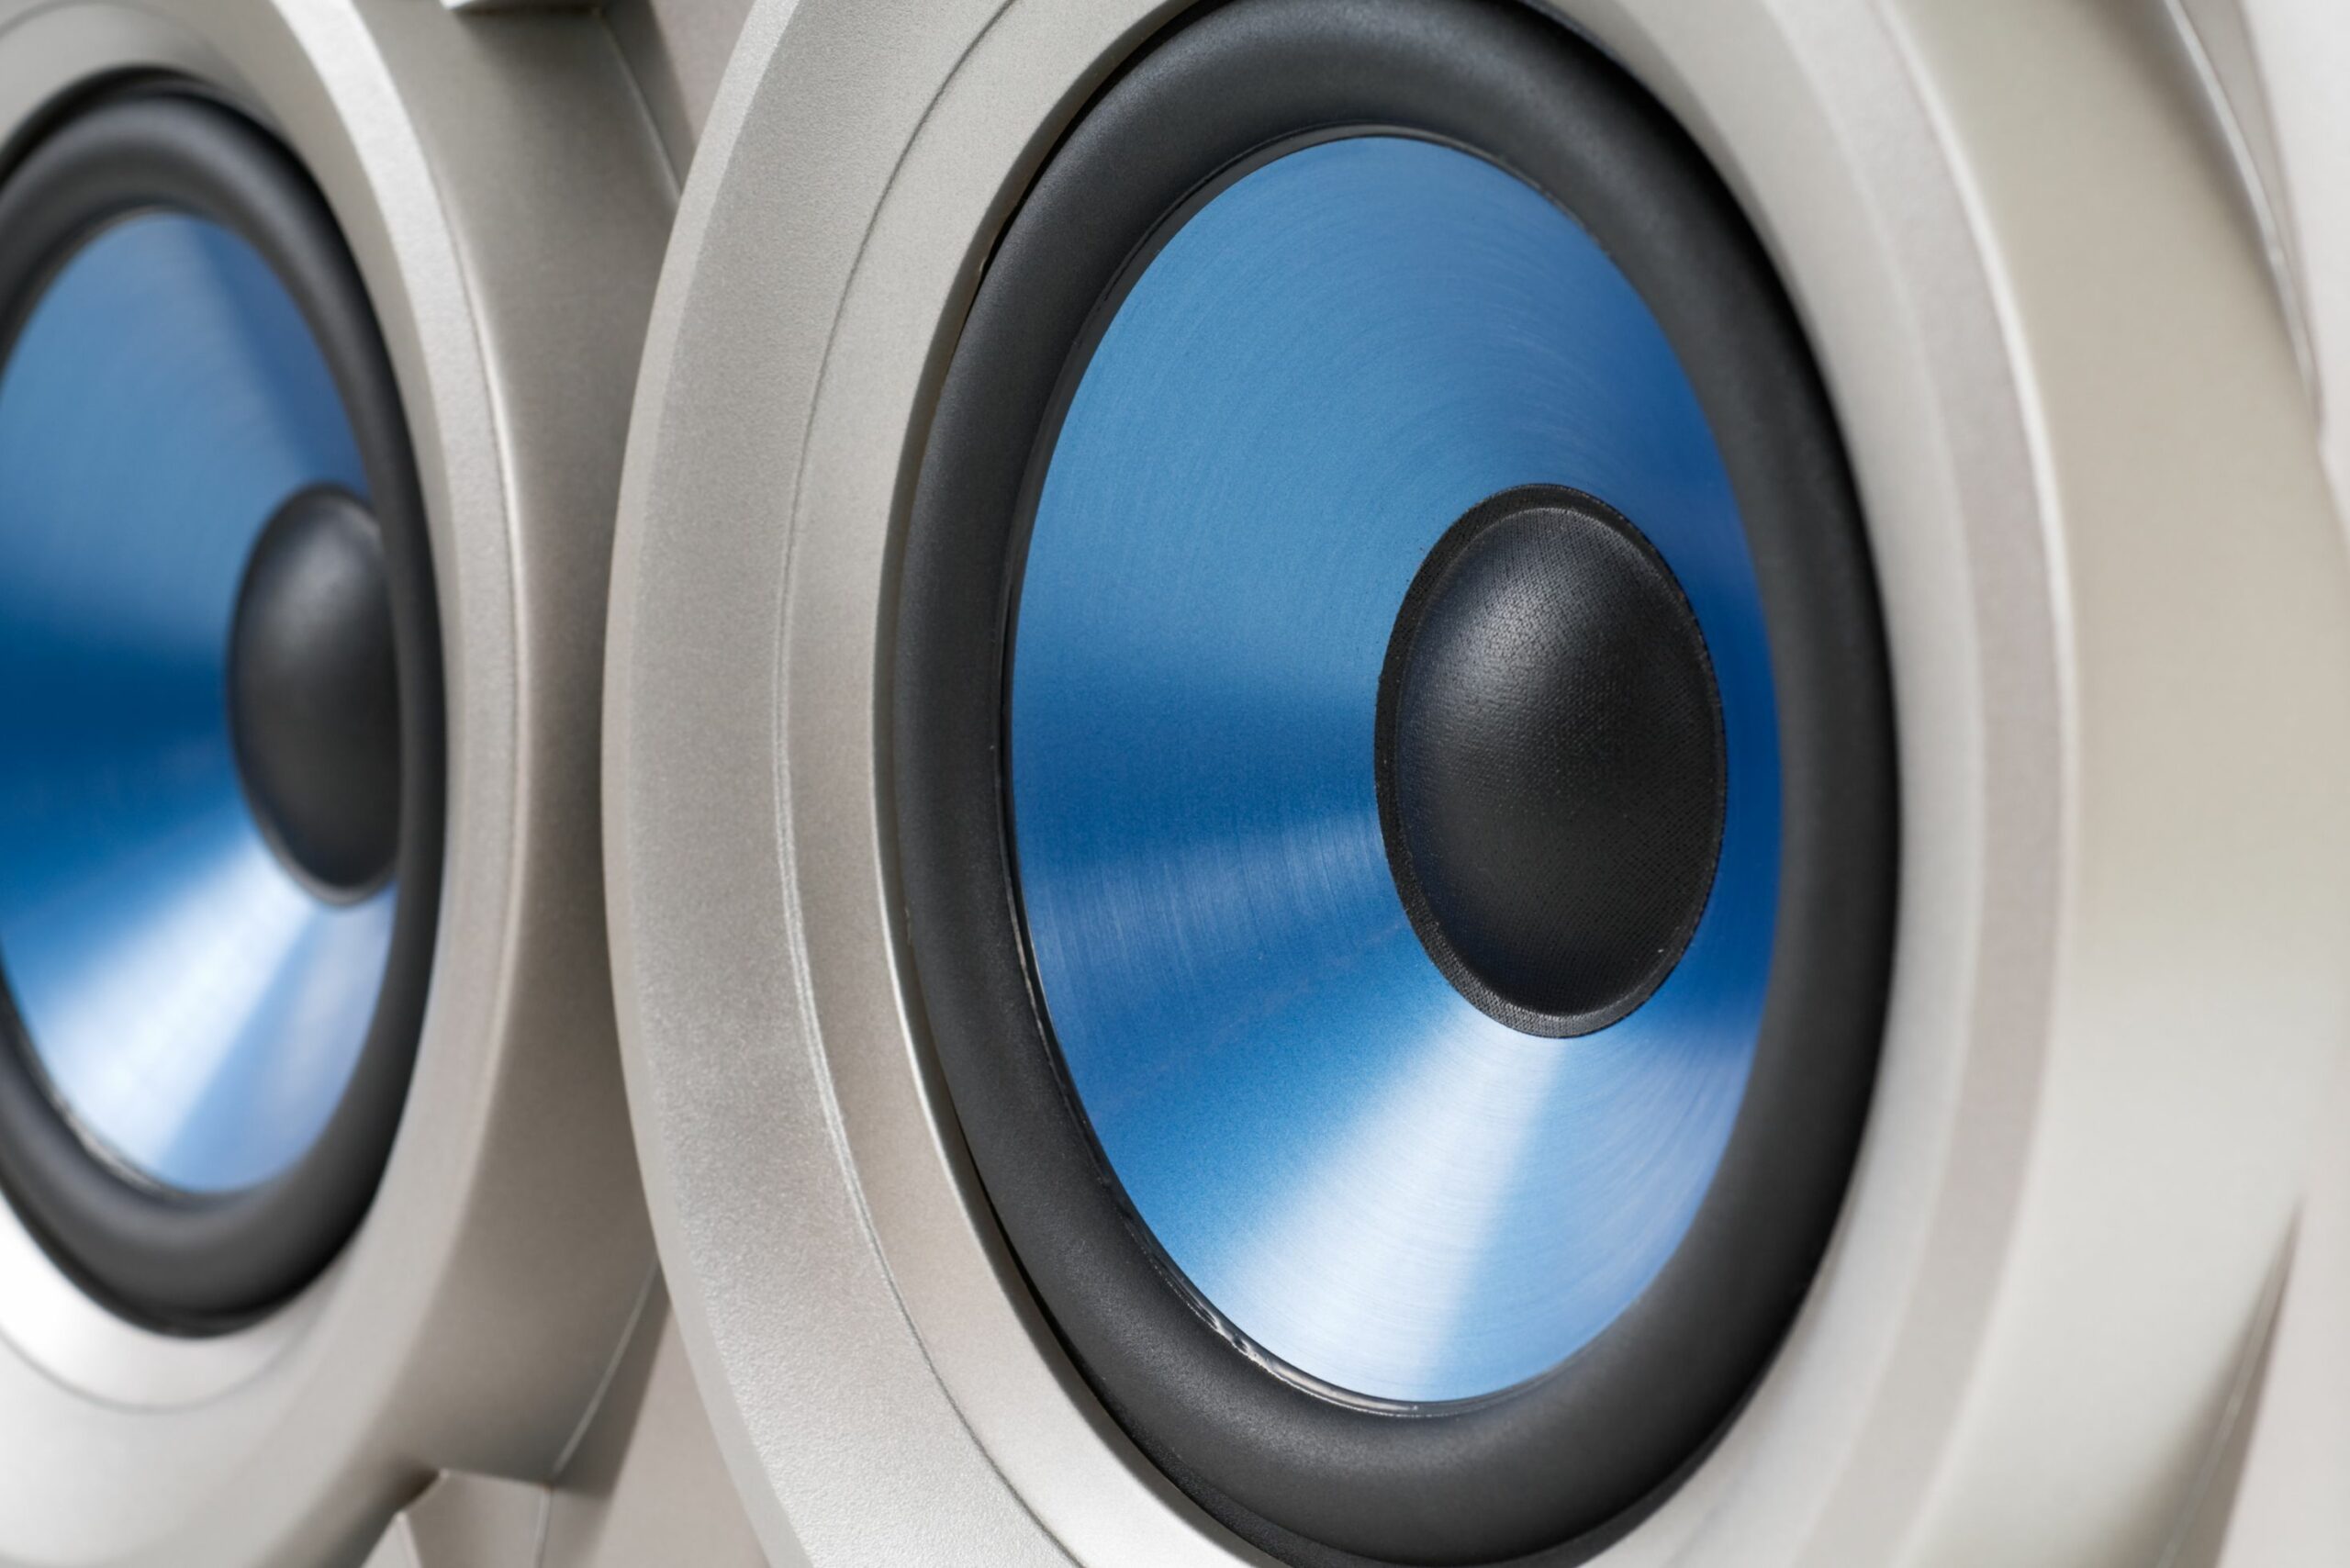 Why Your Subwoofer Makes Popping Noises?